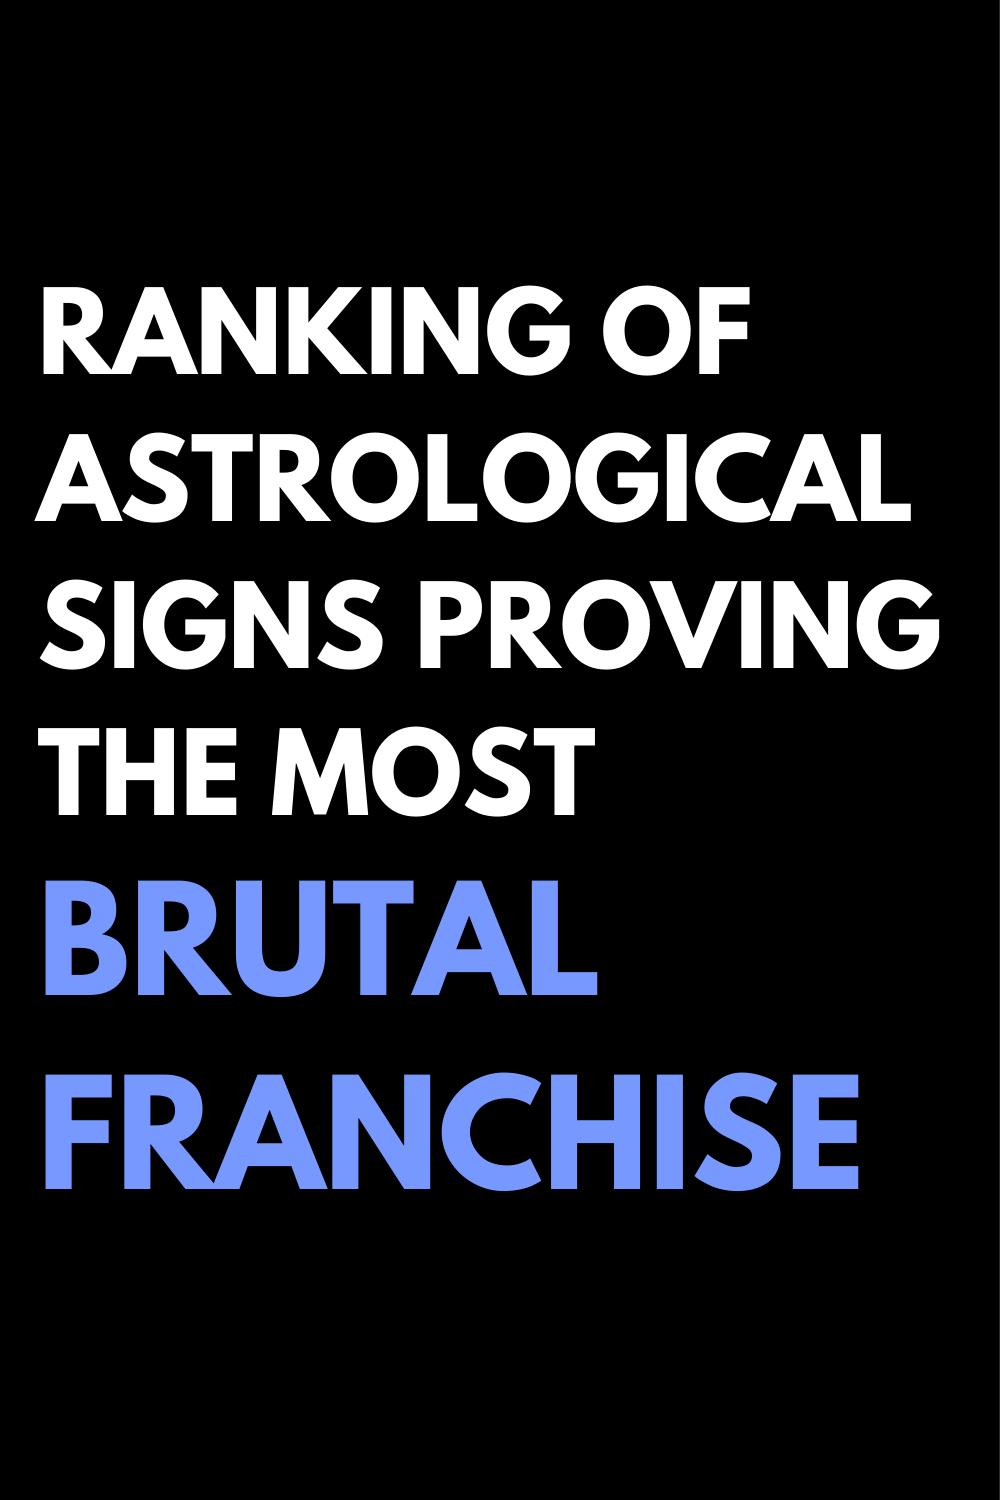 Ranking Of Astrological Signs Proving The Most Brutal Franchise